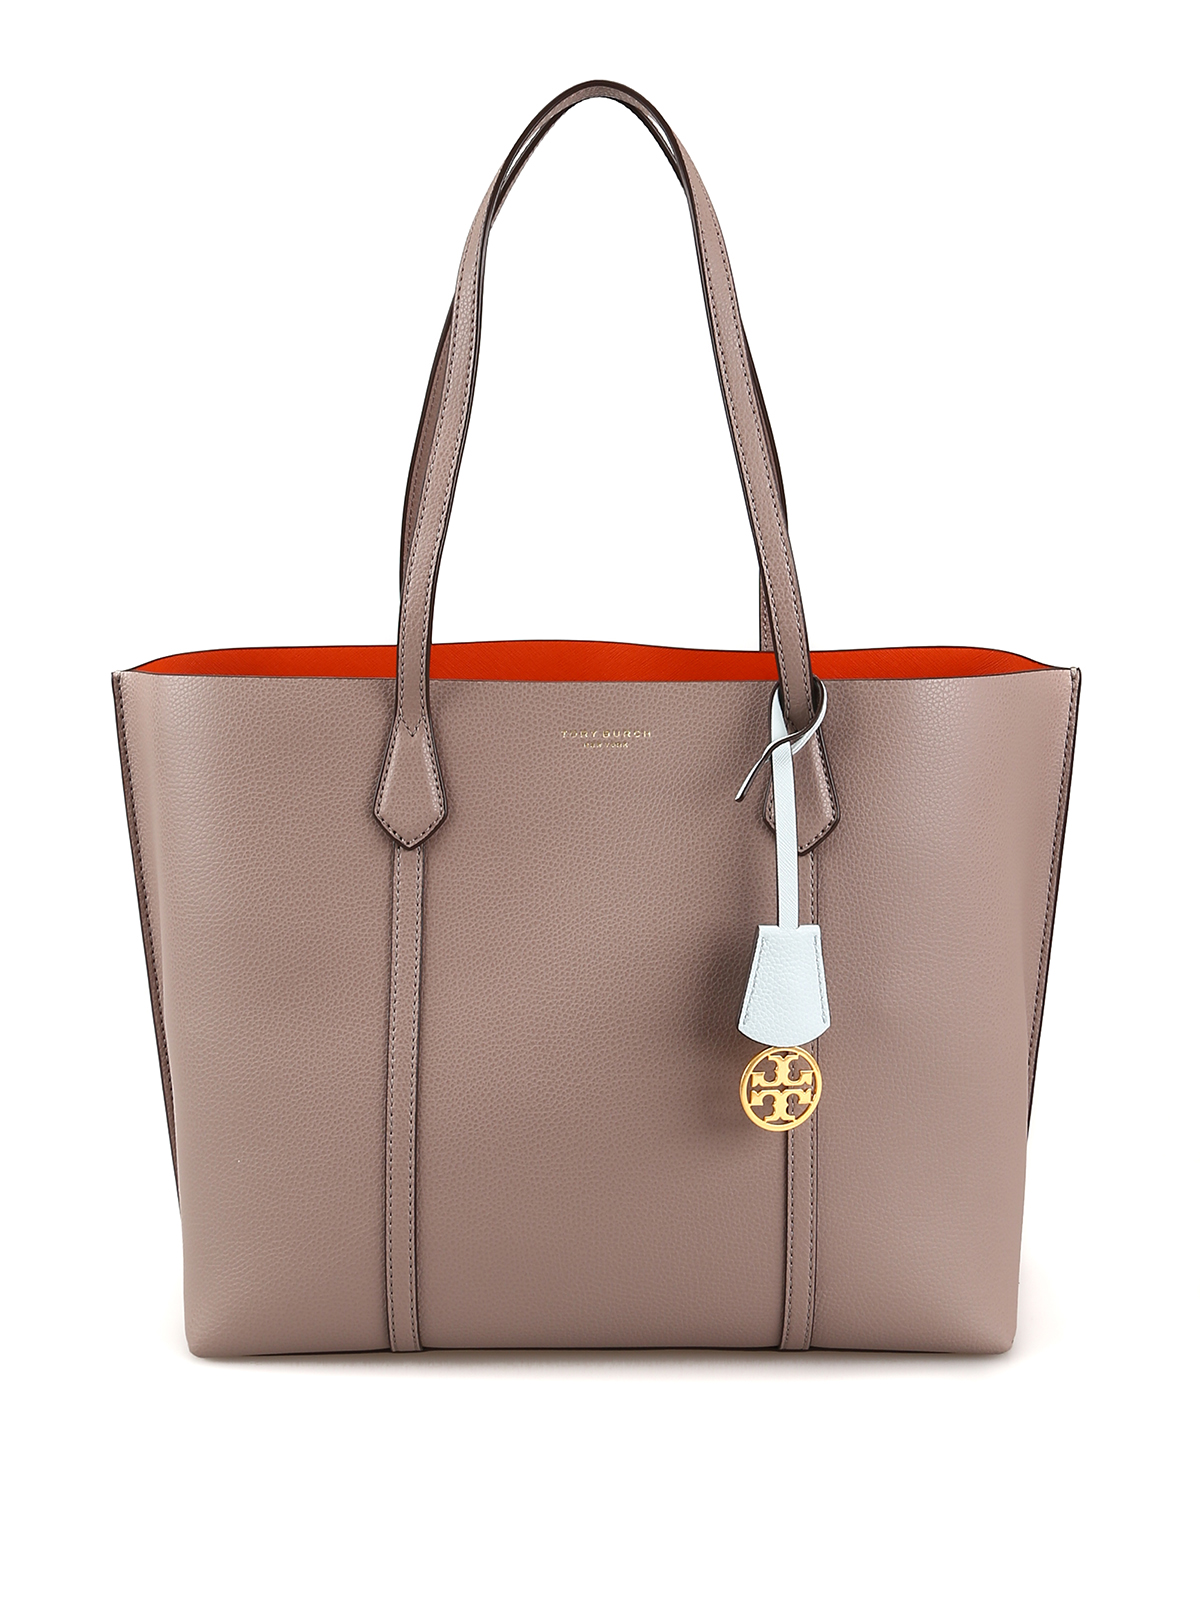 Tory Burch Perry Triple-Compartment Leather Tote Bag